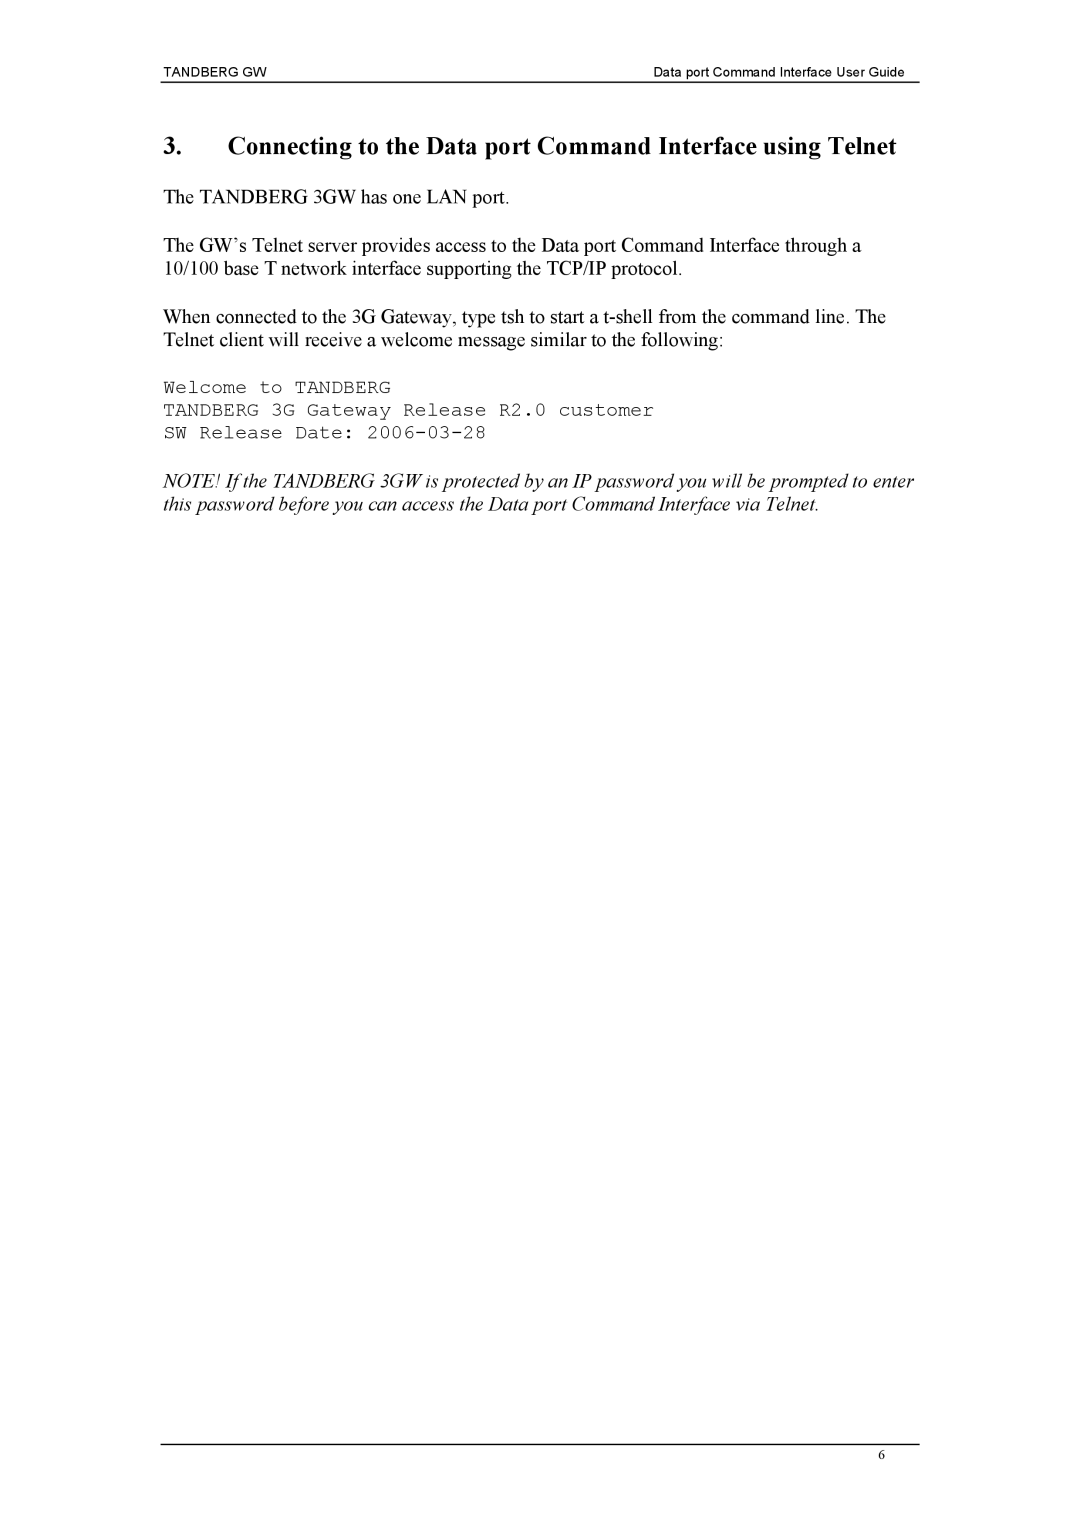 TANDBERG D1320202 manual Connecting to the Data port Command Interface using Telnet 